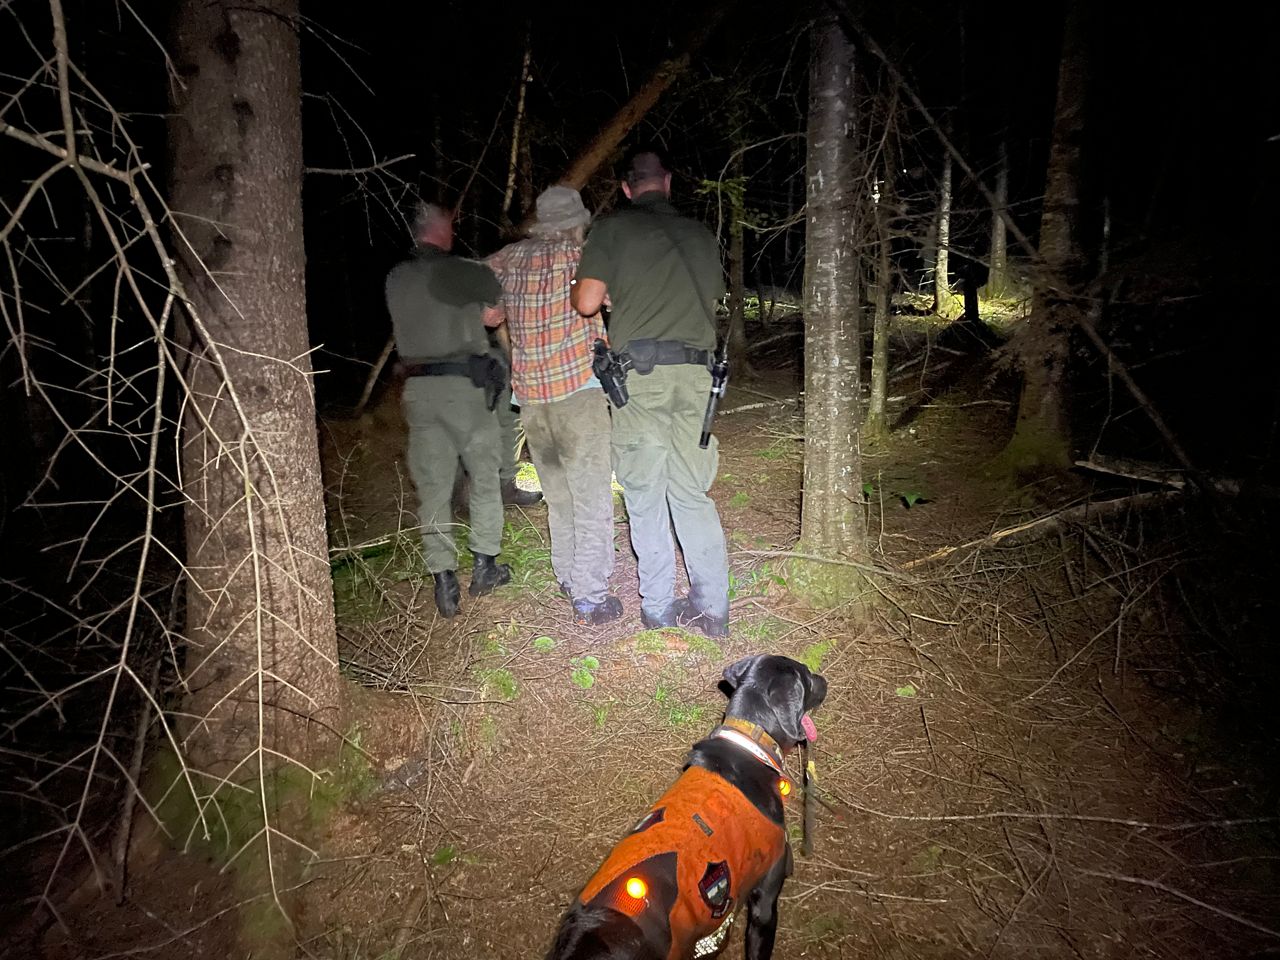 Maine game wardens rescue 85-year-old man near bog in Piscataquis County